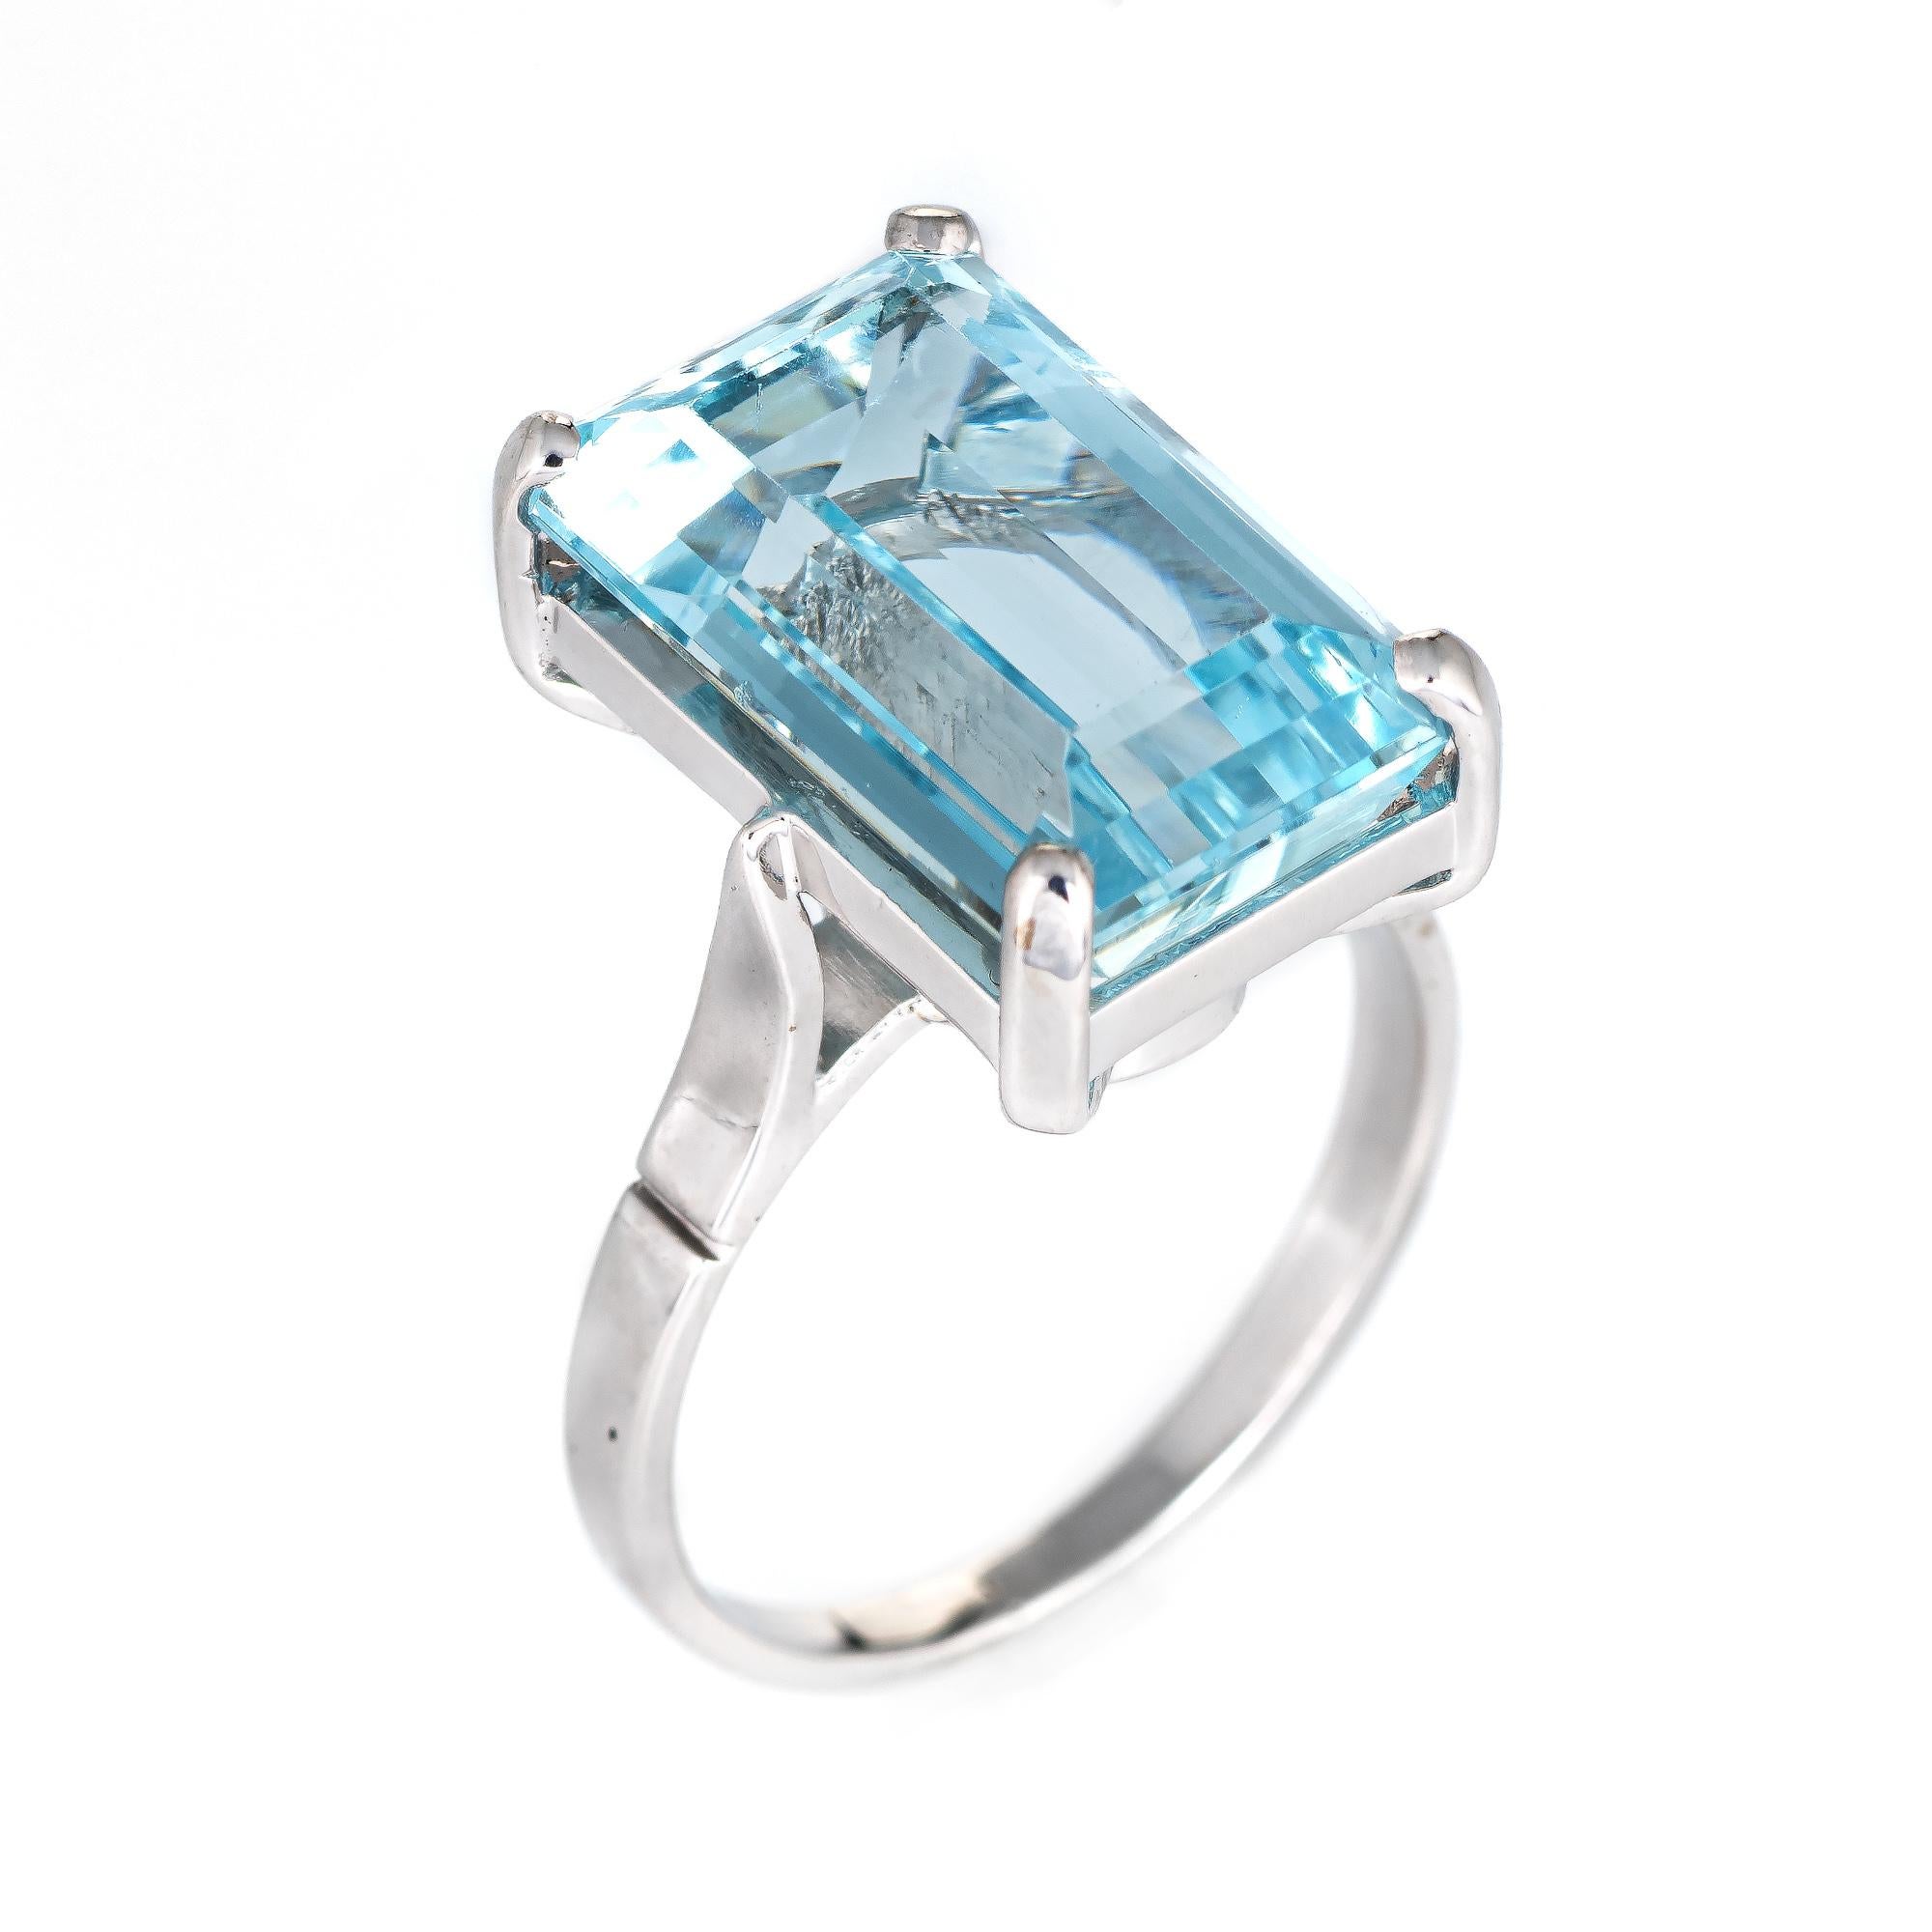 Stylish blue topaz cocktail ring crafted in 18 karat white gold. 

Emerald cut blue topaz measures 15mm x 9.5mm (estimated at 10 carats). The topaz is in excellent condition and free of cracks or chips. 

The topaz is set securely in a four pronged